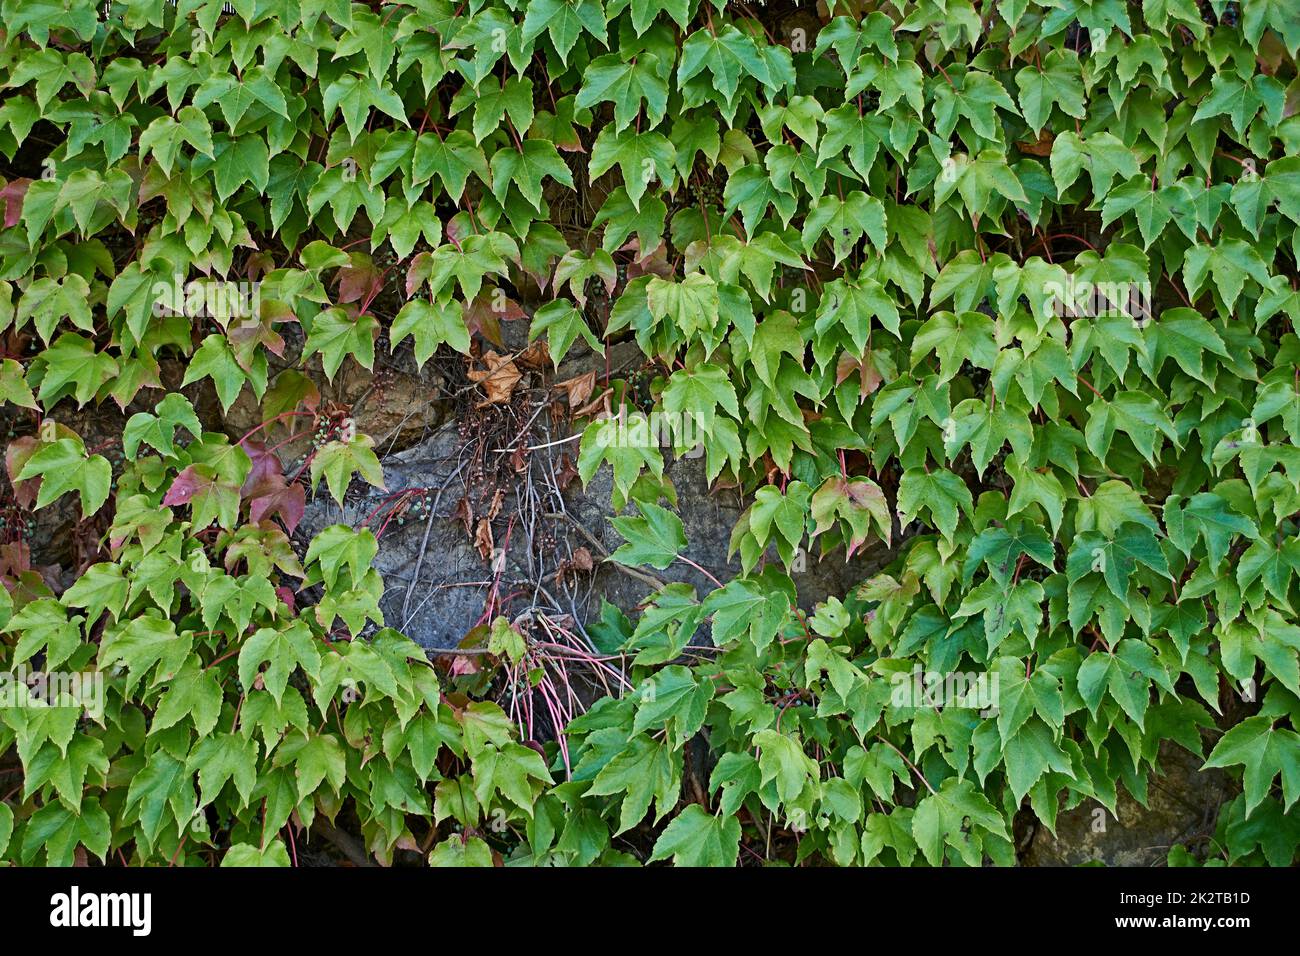 Handmade stone wall covered with ivy leaves Stock Photo